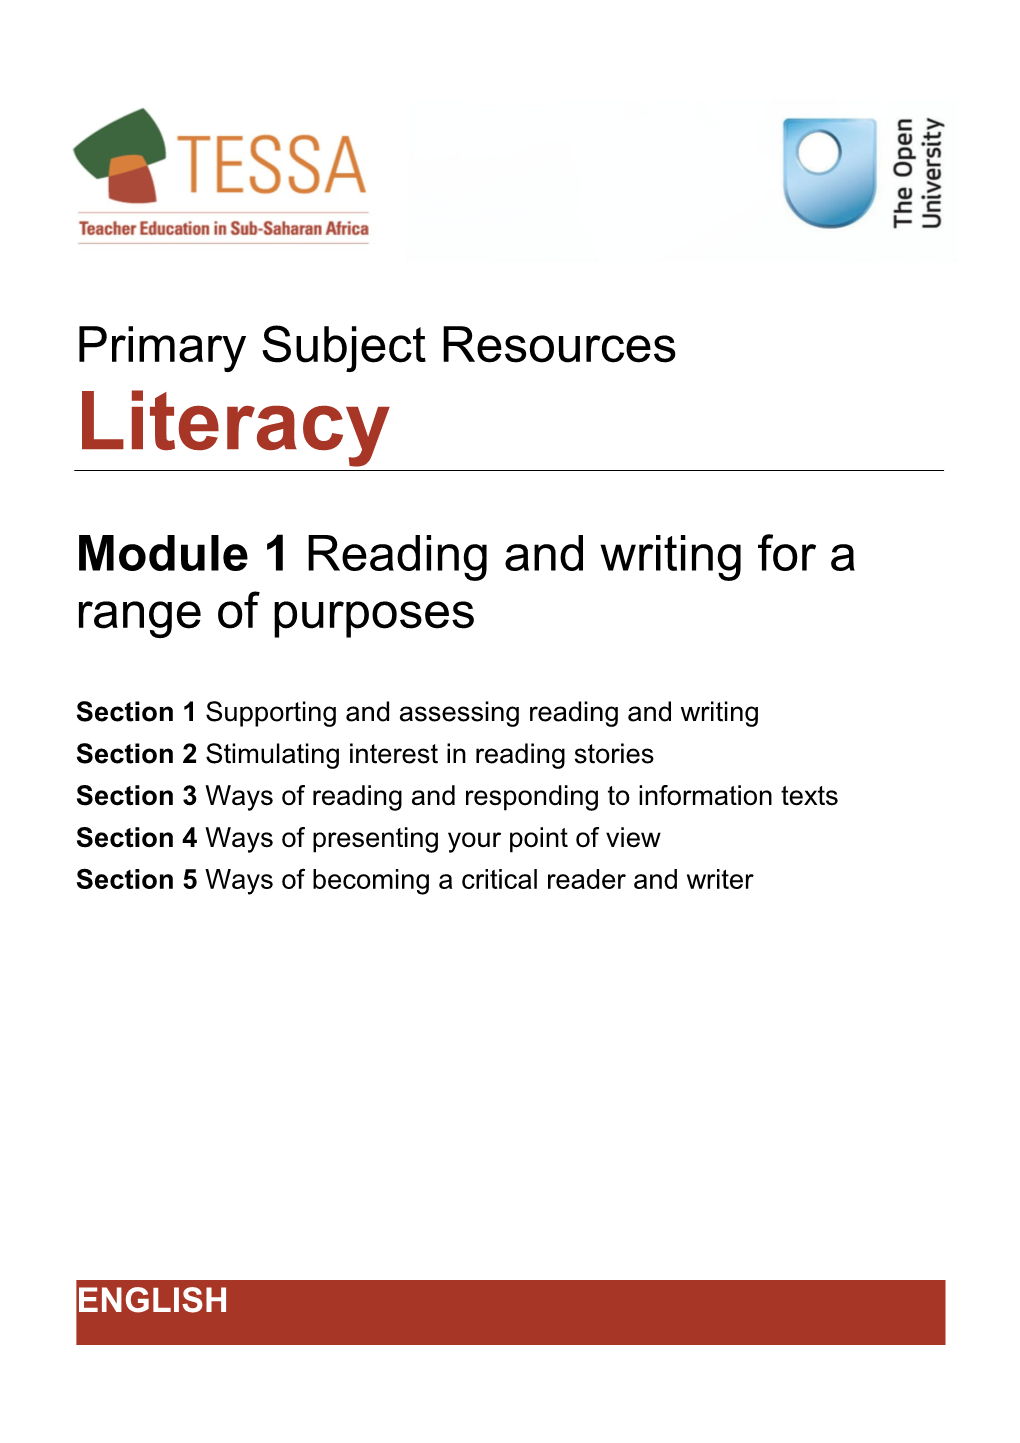 Module 1: Reading and Writing for a Range of Purposes